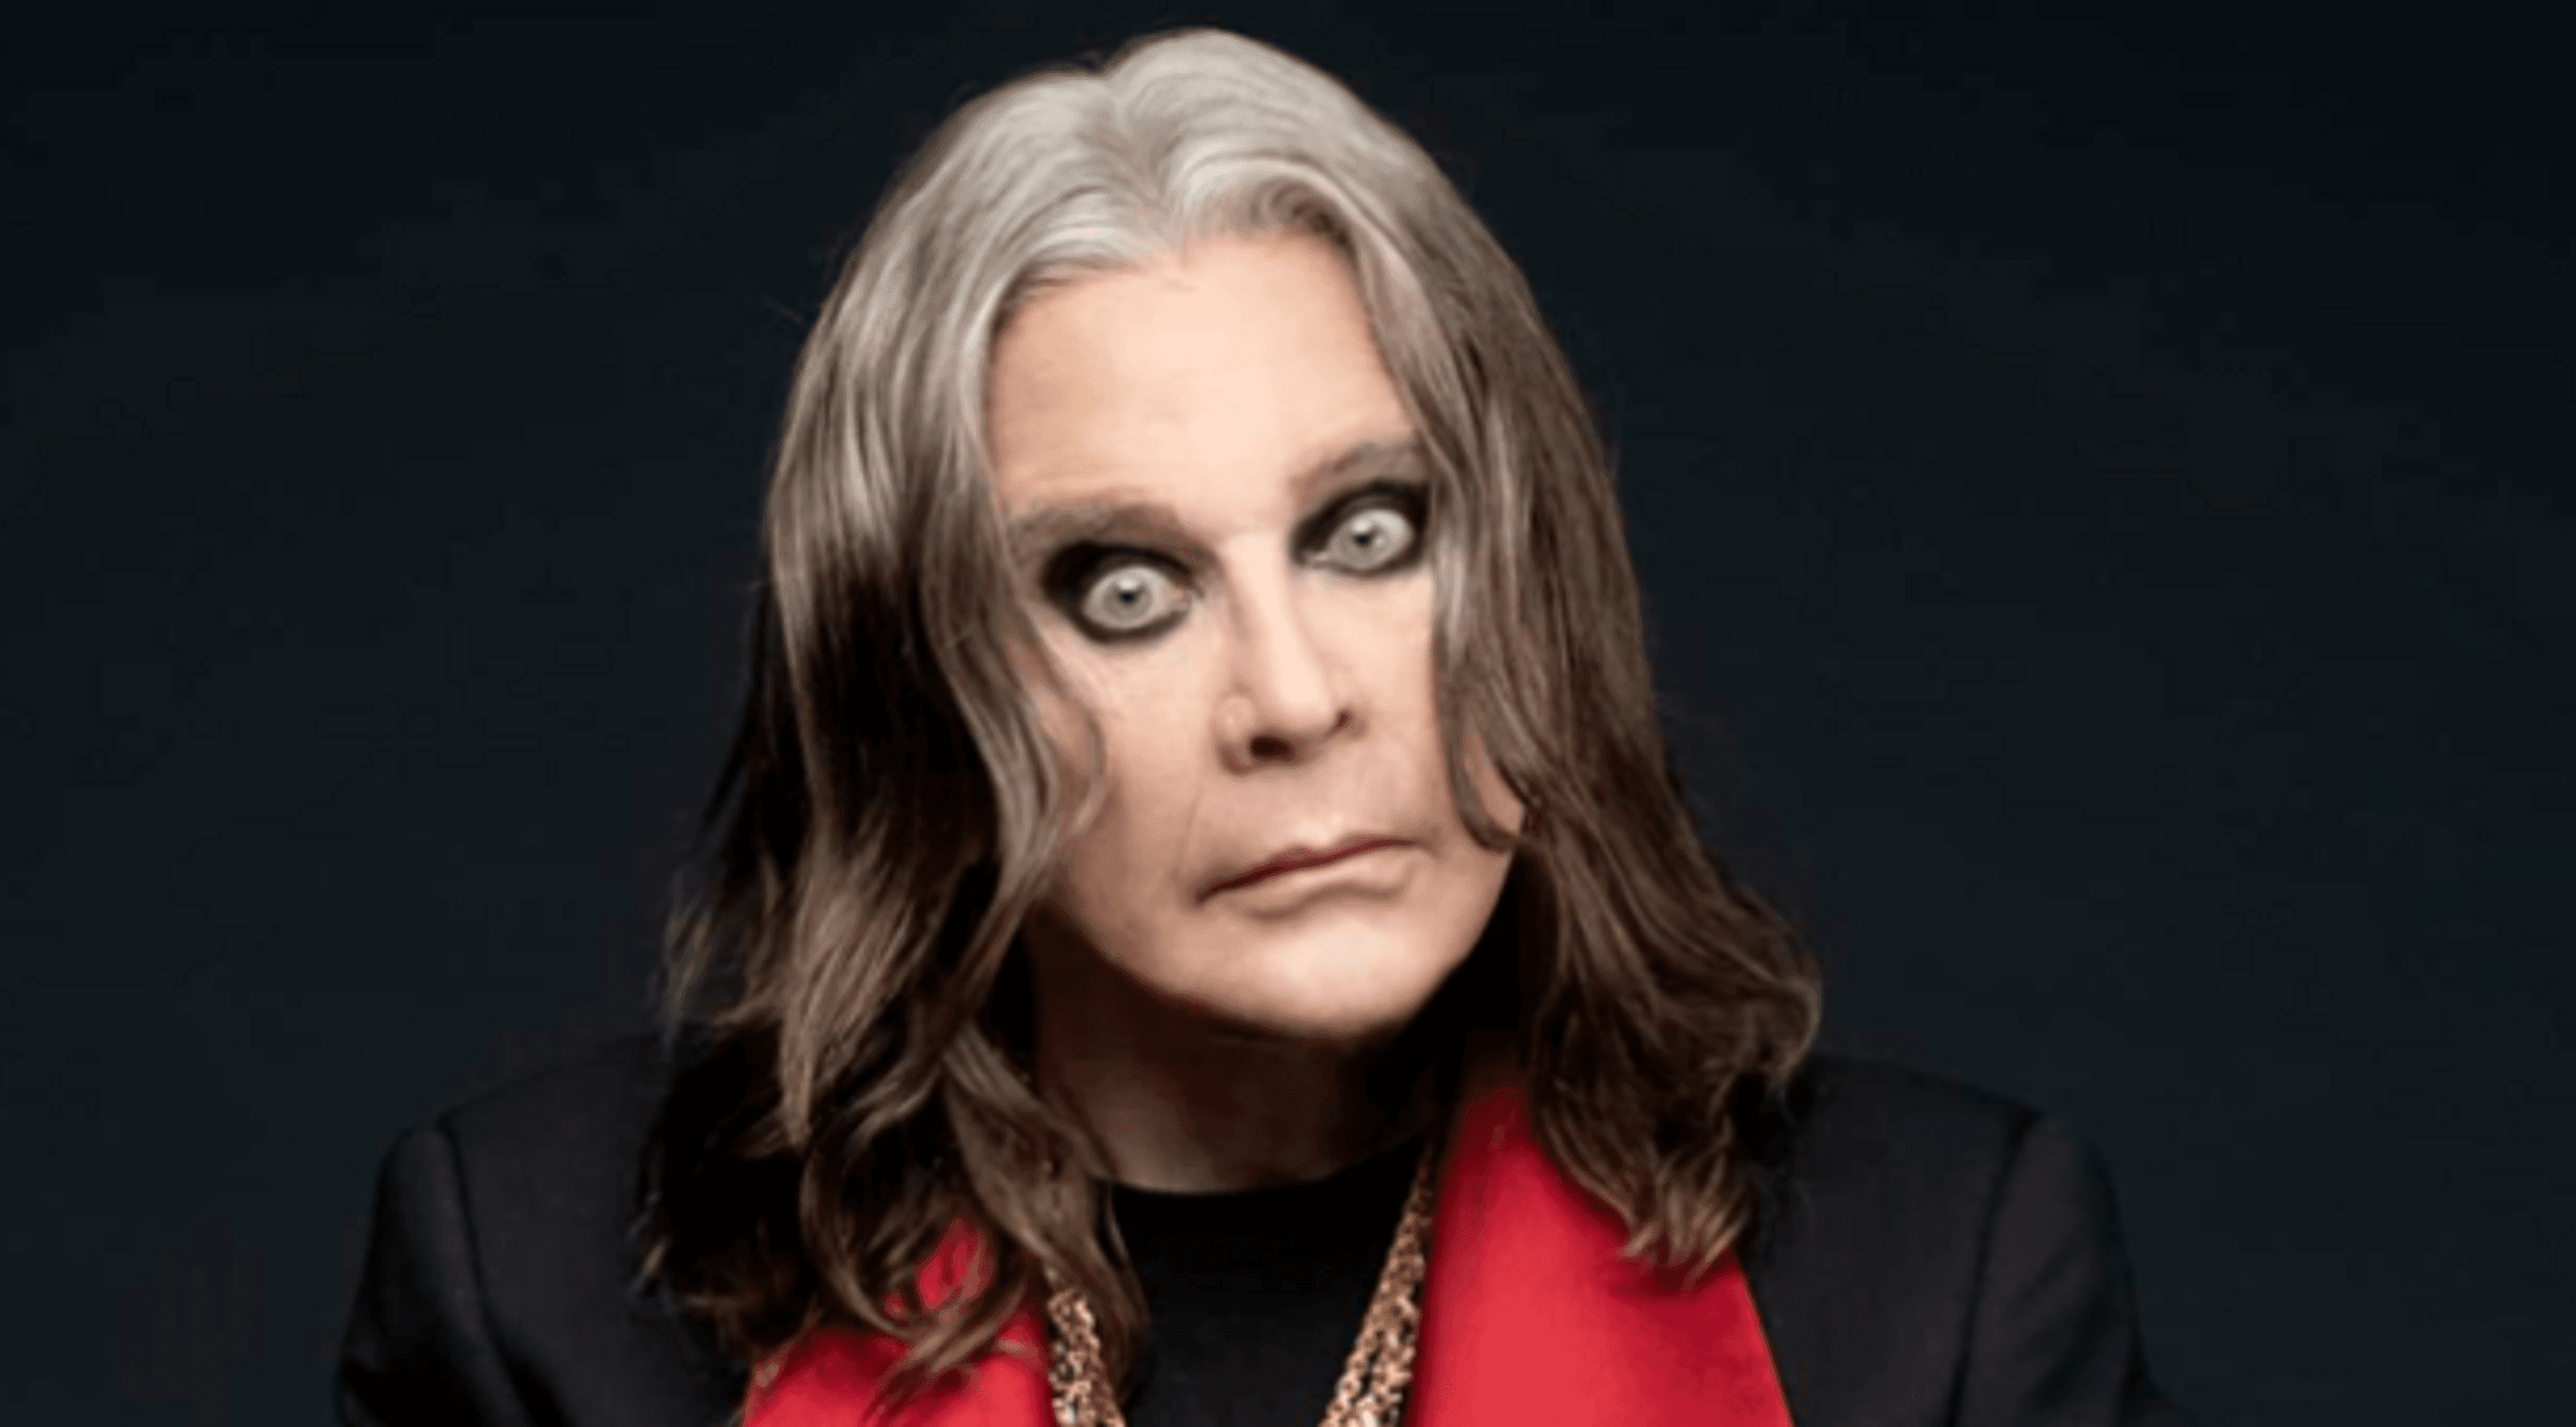 Ozzy Osbourne's new album is to be released this fall